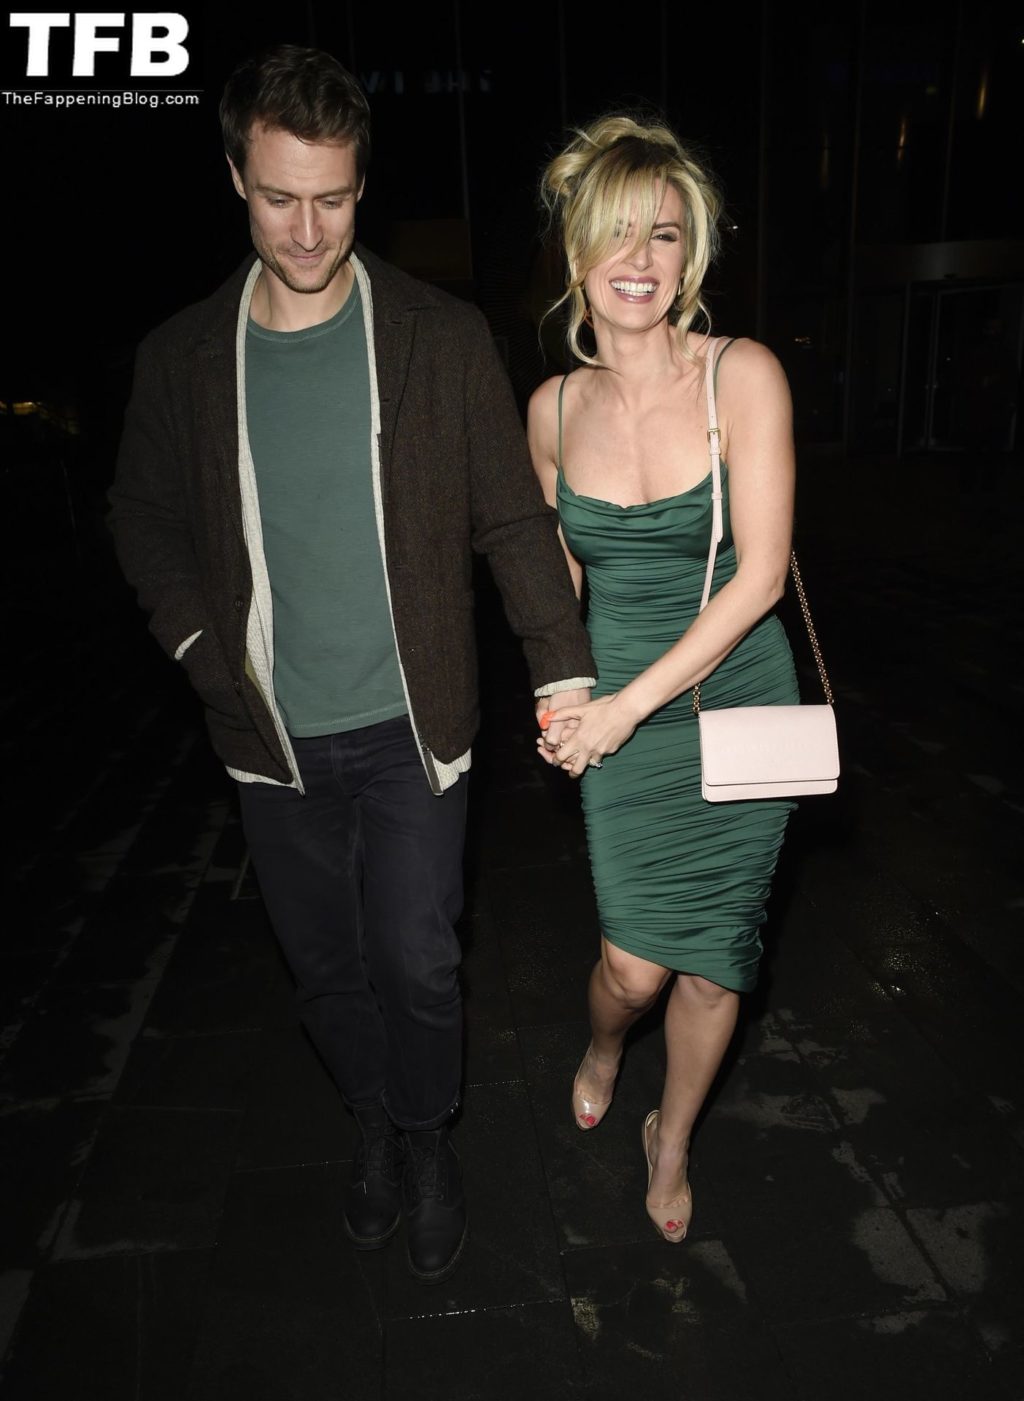 Sarah Jayne Dunn Sexy The Fappening Blog 8 1024x1401 - Sarah Jayne Dunn Looks Hot in a Green Dress Arriving at the Re-Launch of The Alchemist in Spinningfields (26 Photos)